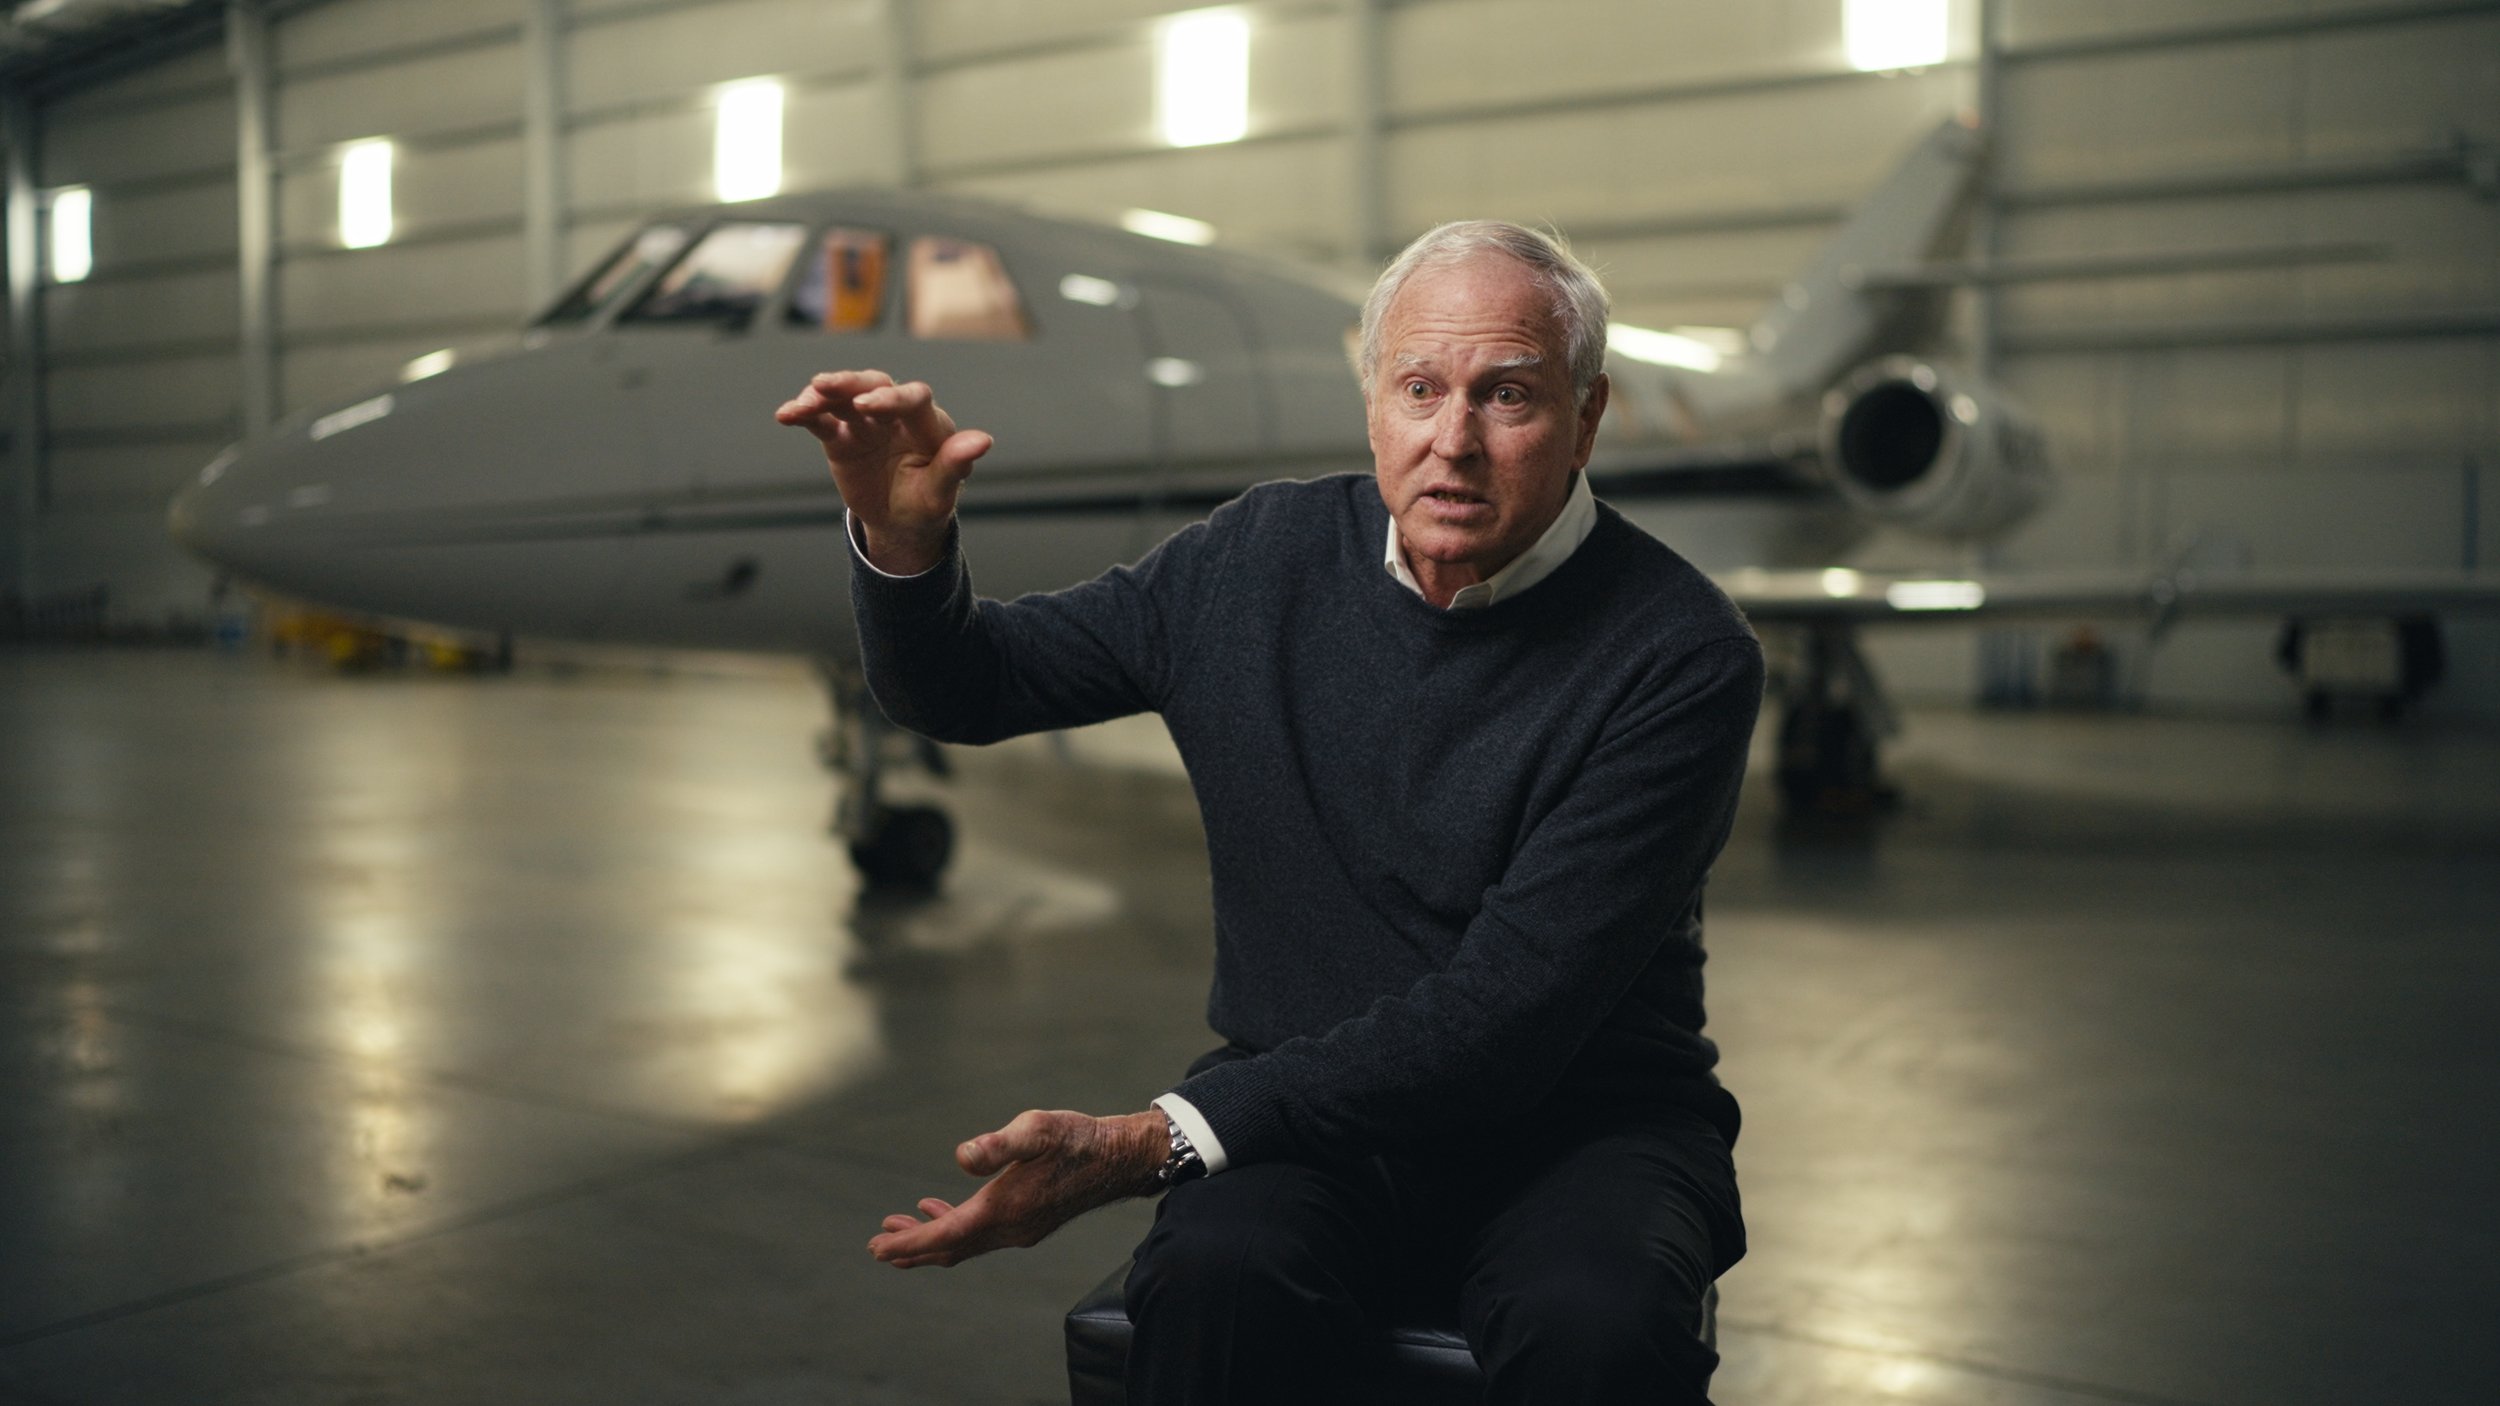  Fred George, senior editor and chief pilot for  Aviation Week  